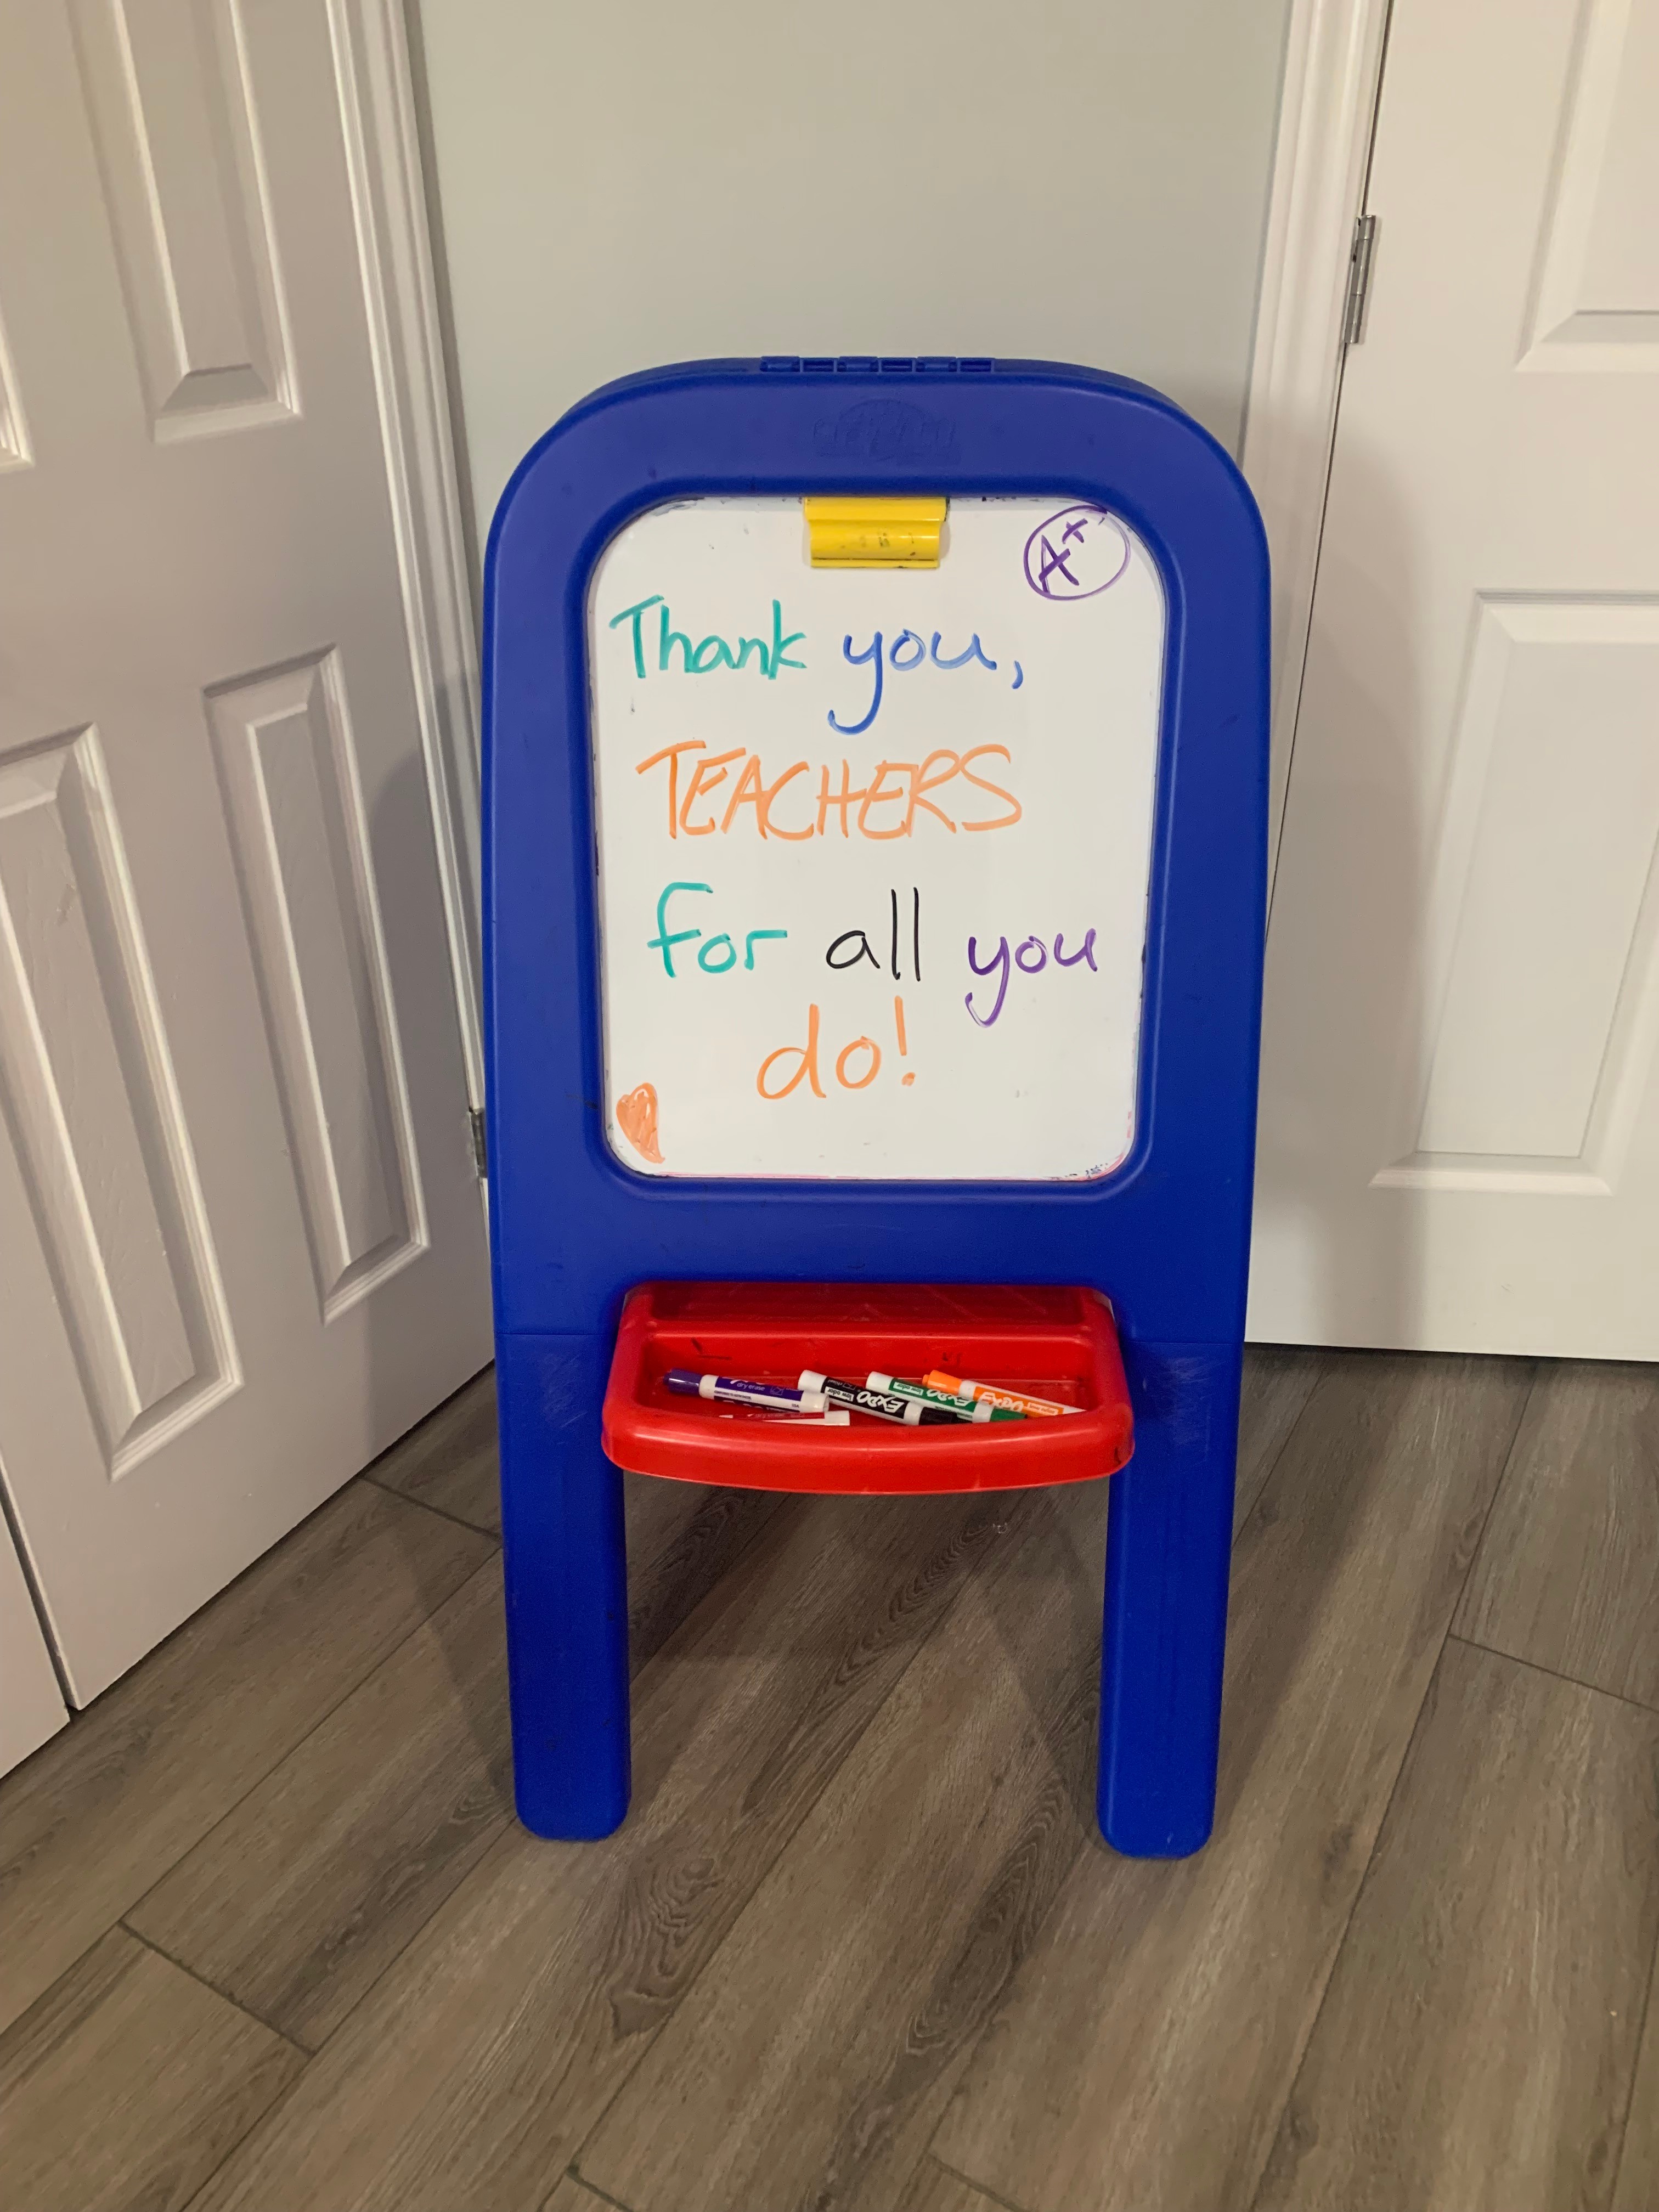 Dry Erase board with message on it reading "Thank you teachers for all you do!"